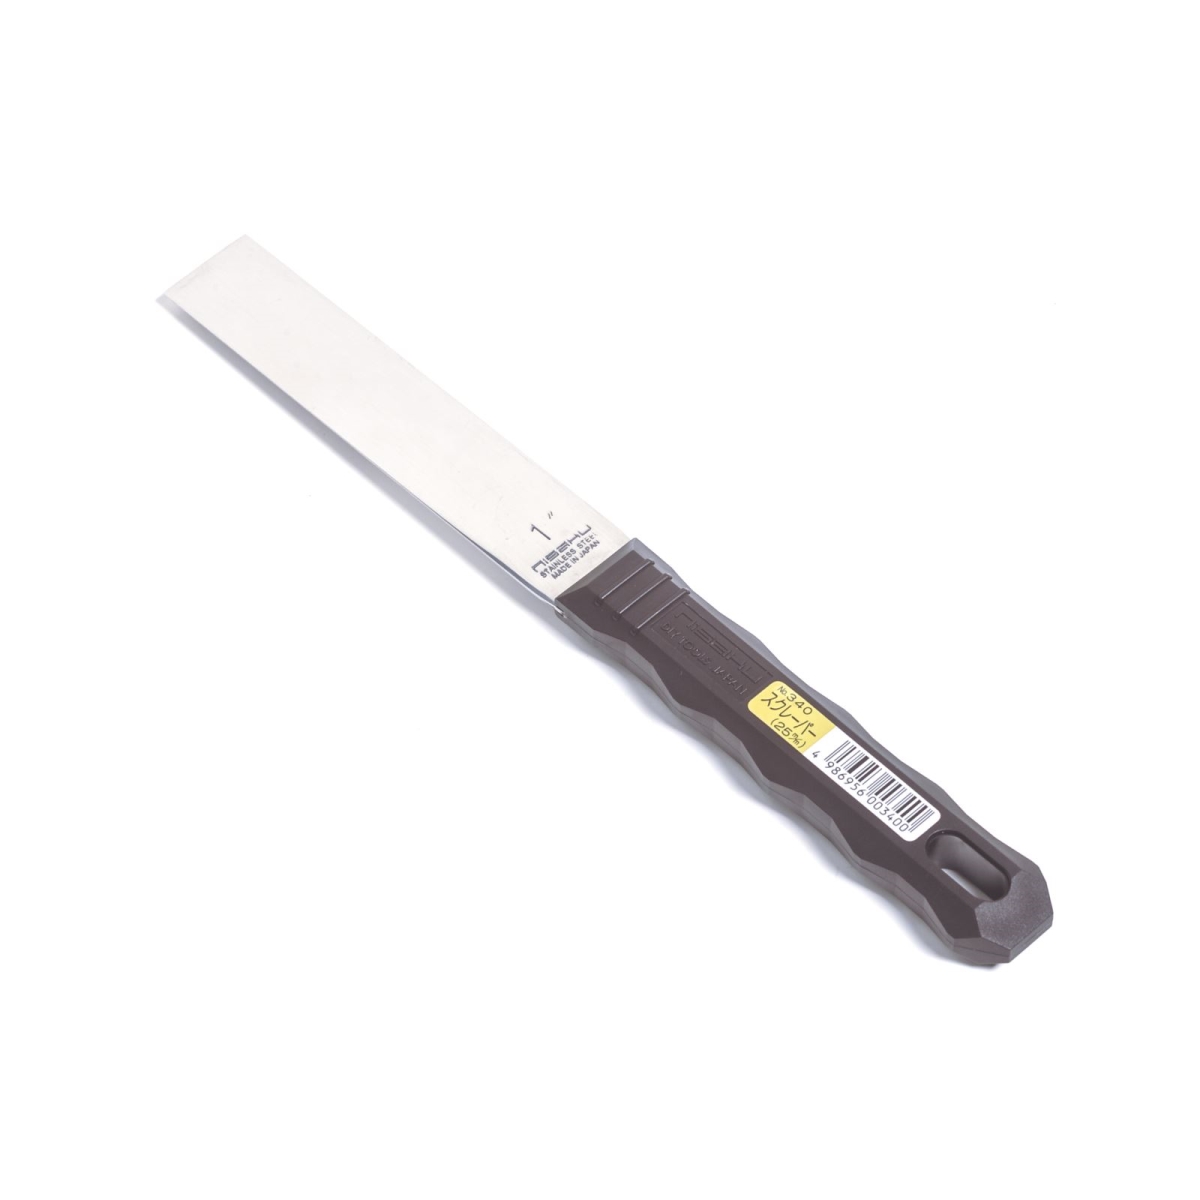 Njp340 1 In. Blade Stainless Steel Putty Knife